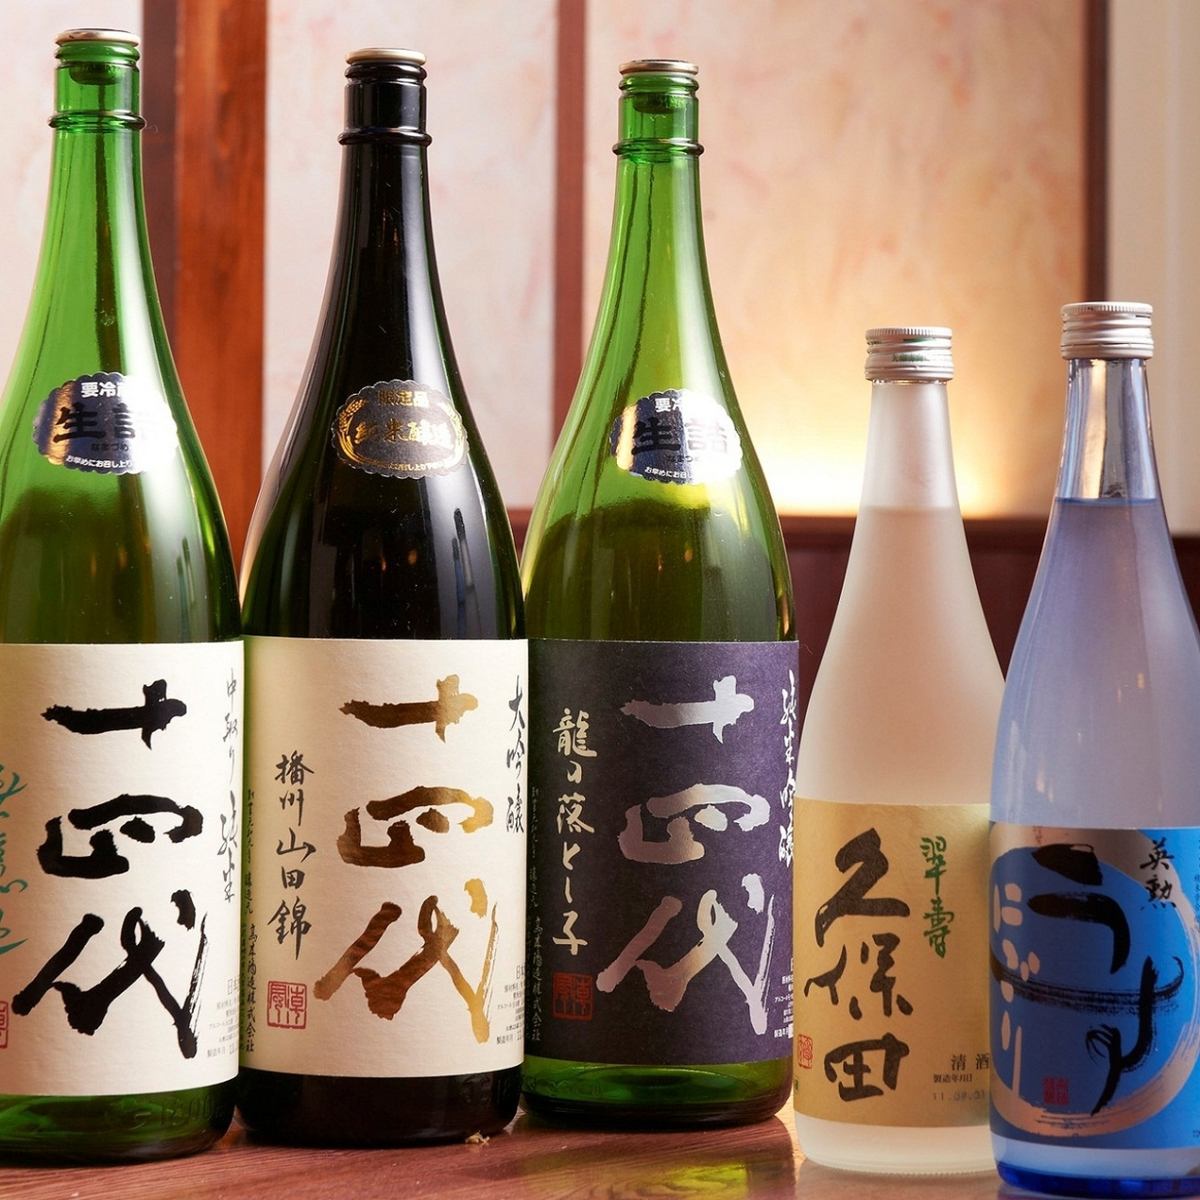 We have branded Japanese sake! Please enjoy it with our specialty fish dishes.